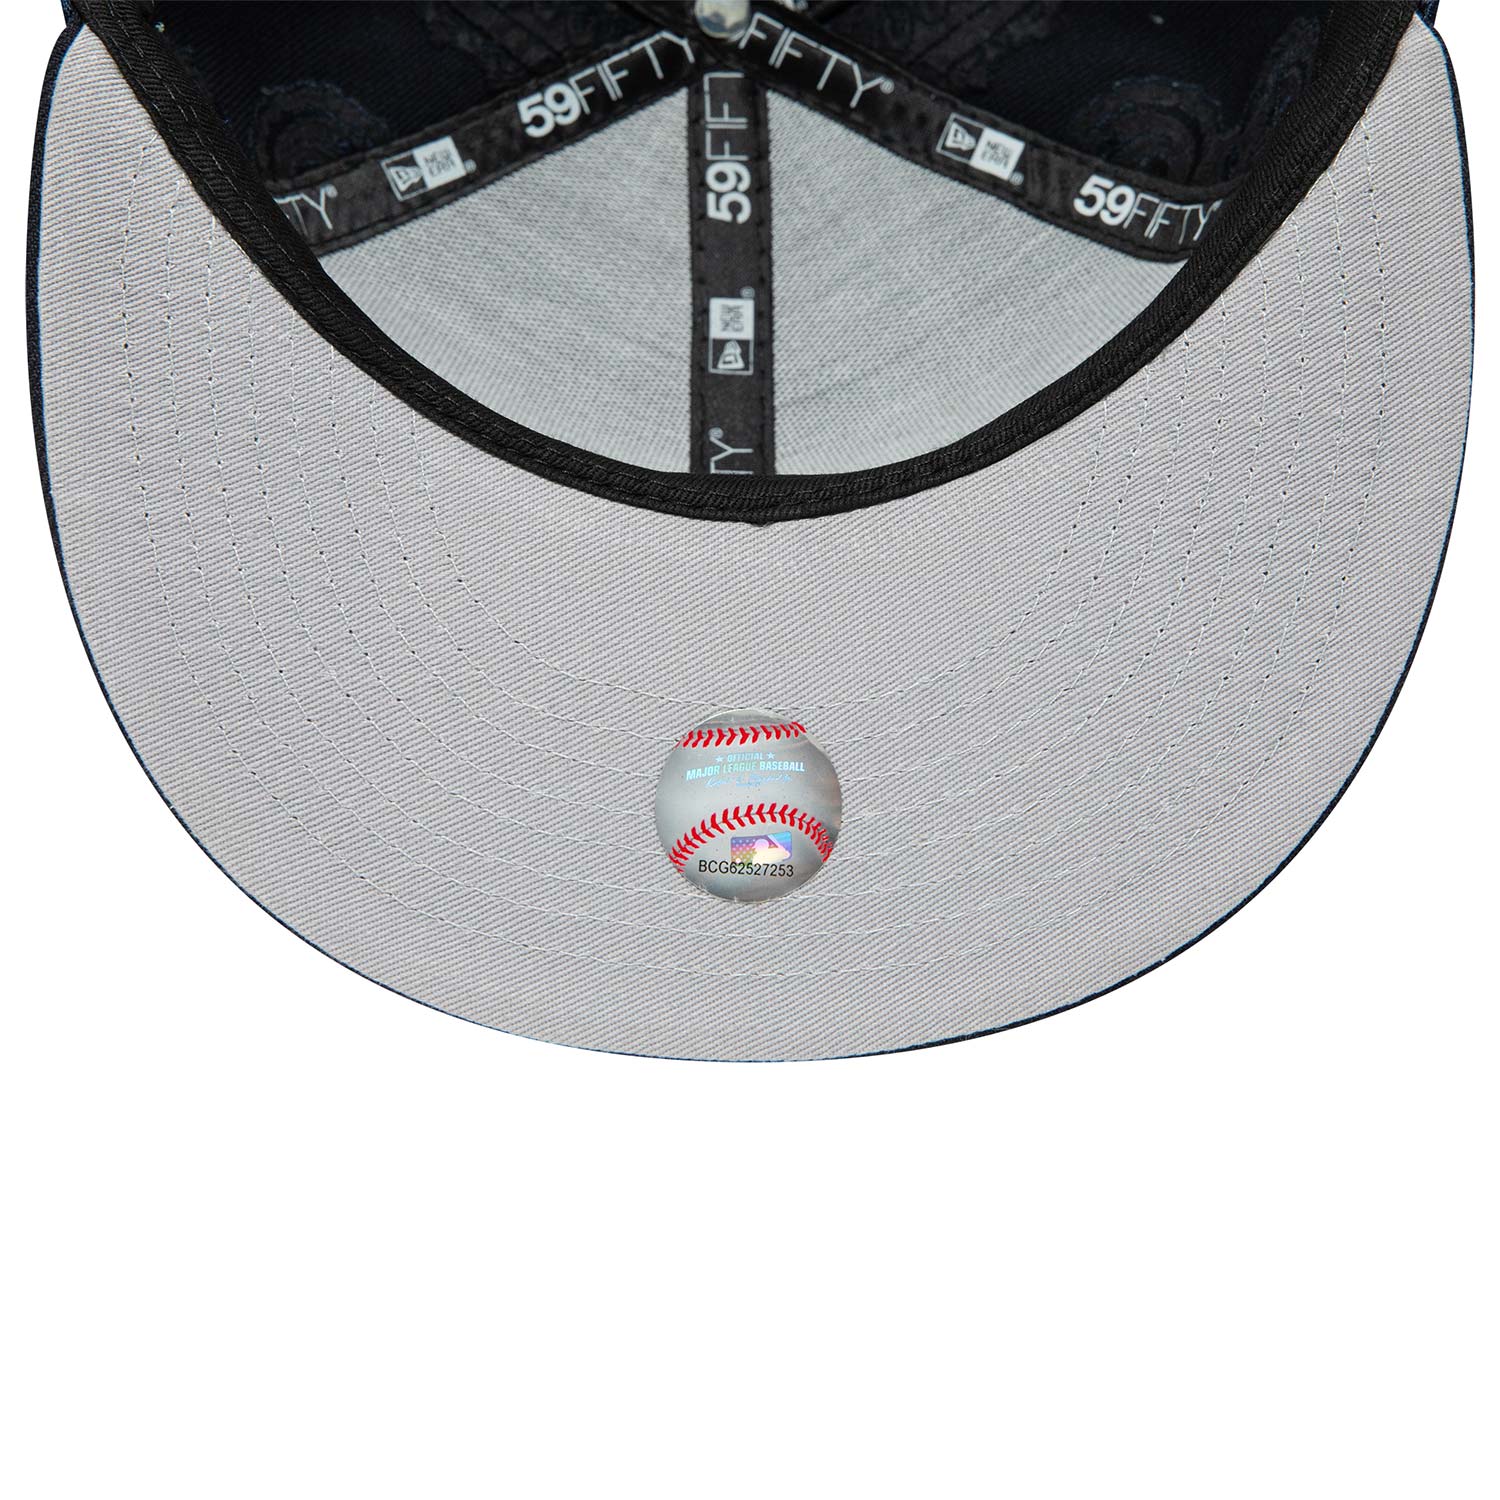 Cappellino 59FIFTY Fitted New York Yankees MLB Swirl Blu scuro 